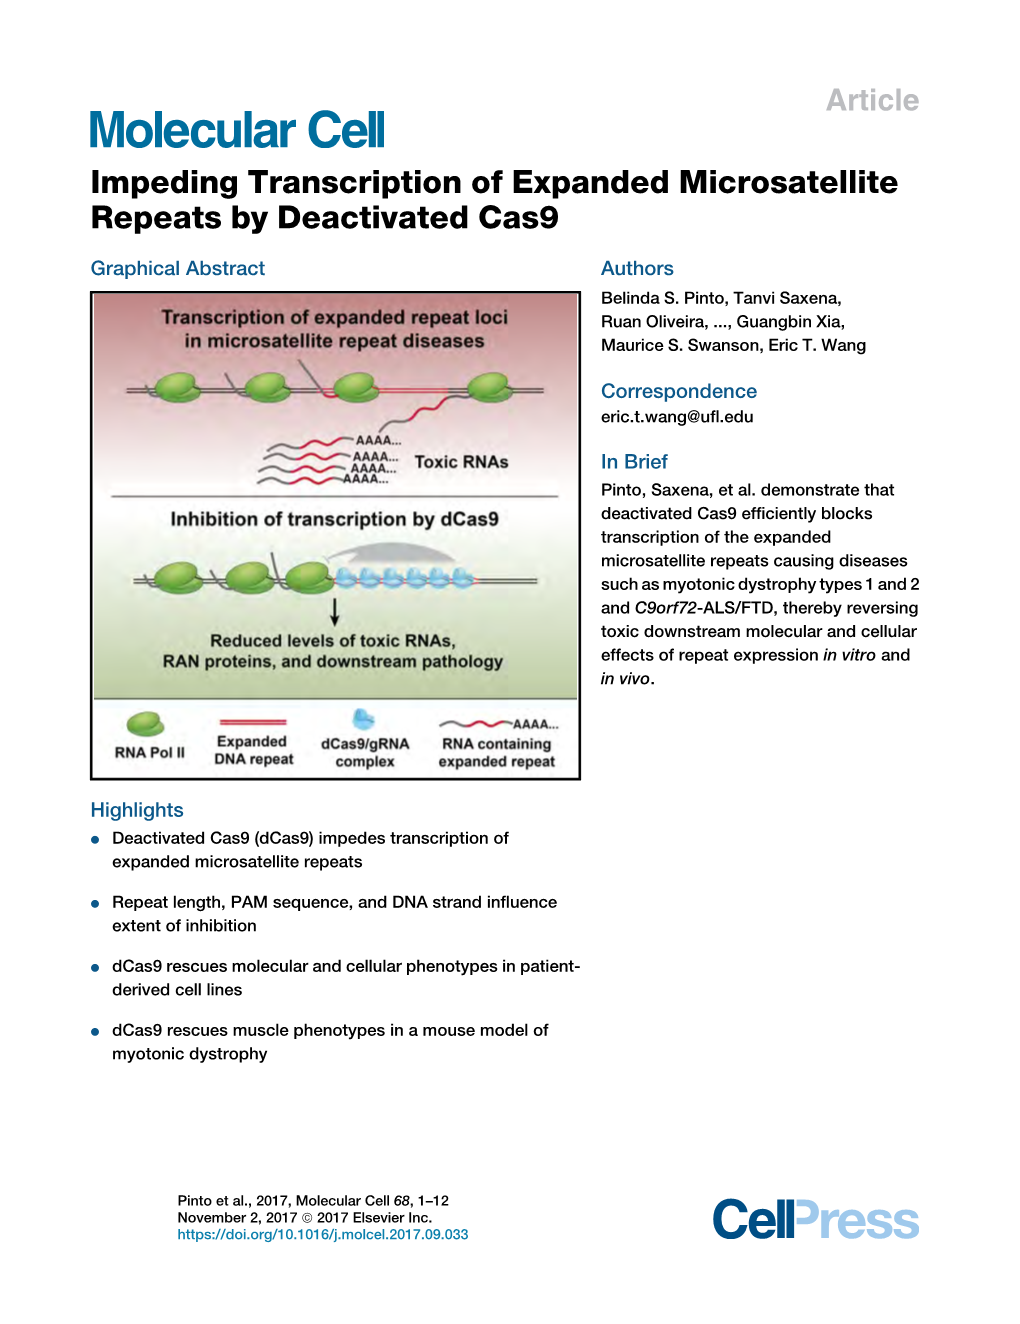 Impeding Transcription of Expanded Microsatellite Repeats by Deactivated Cas9